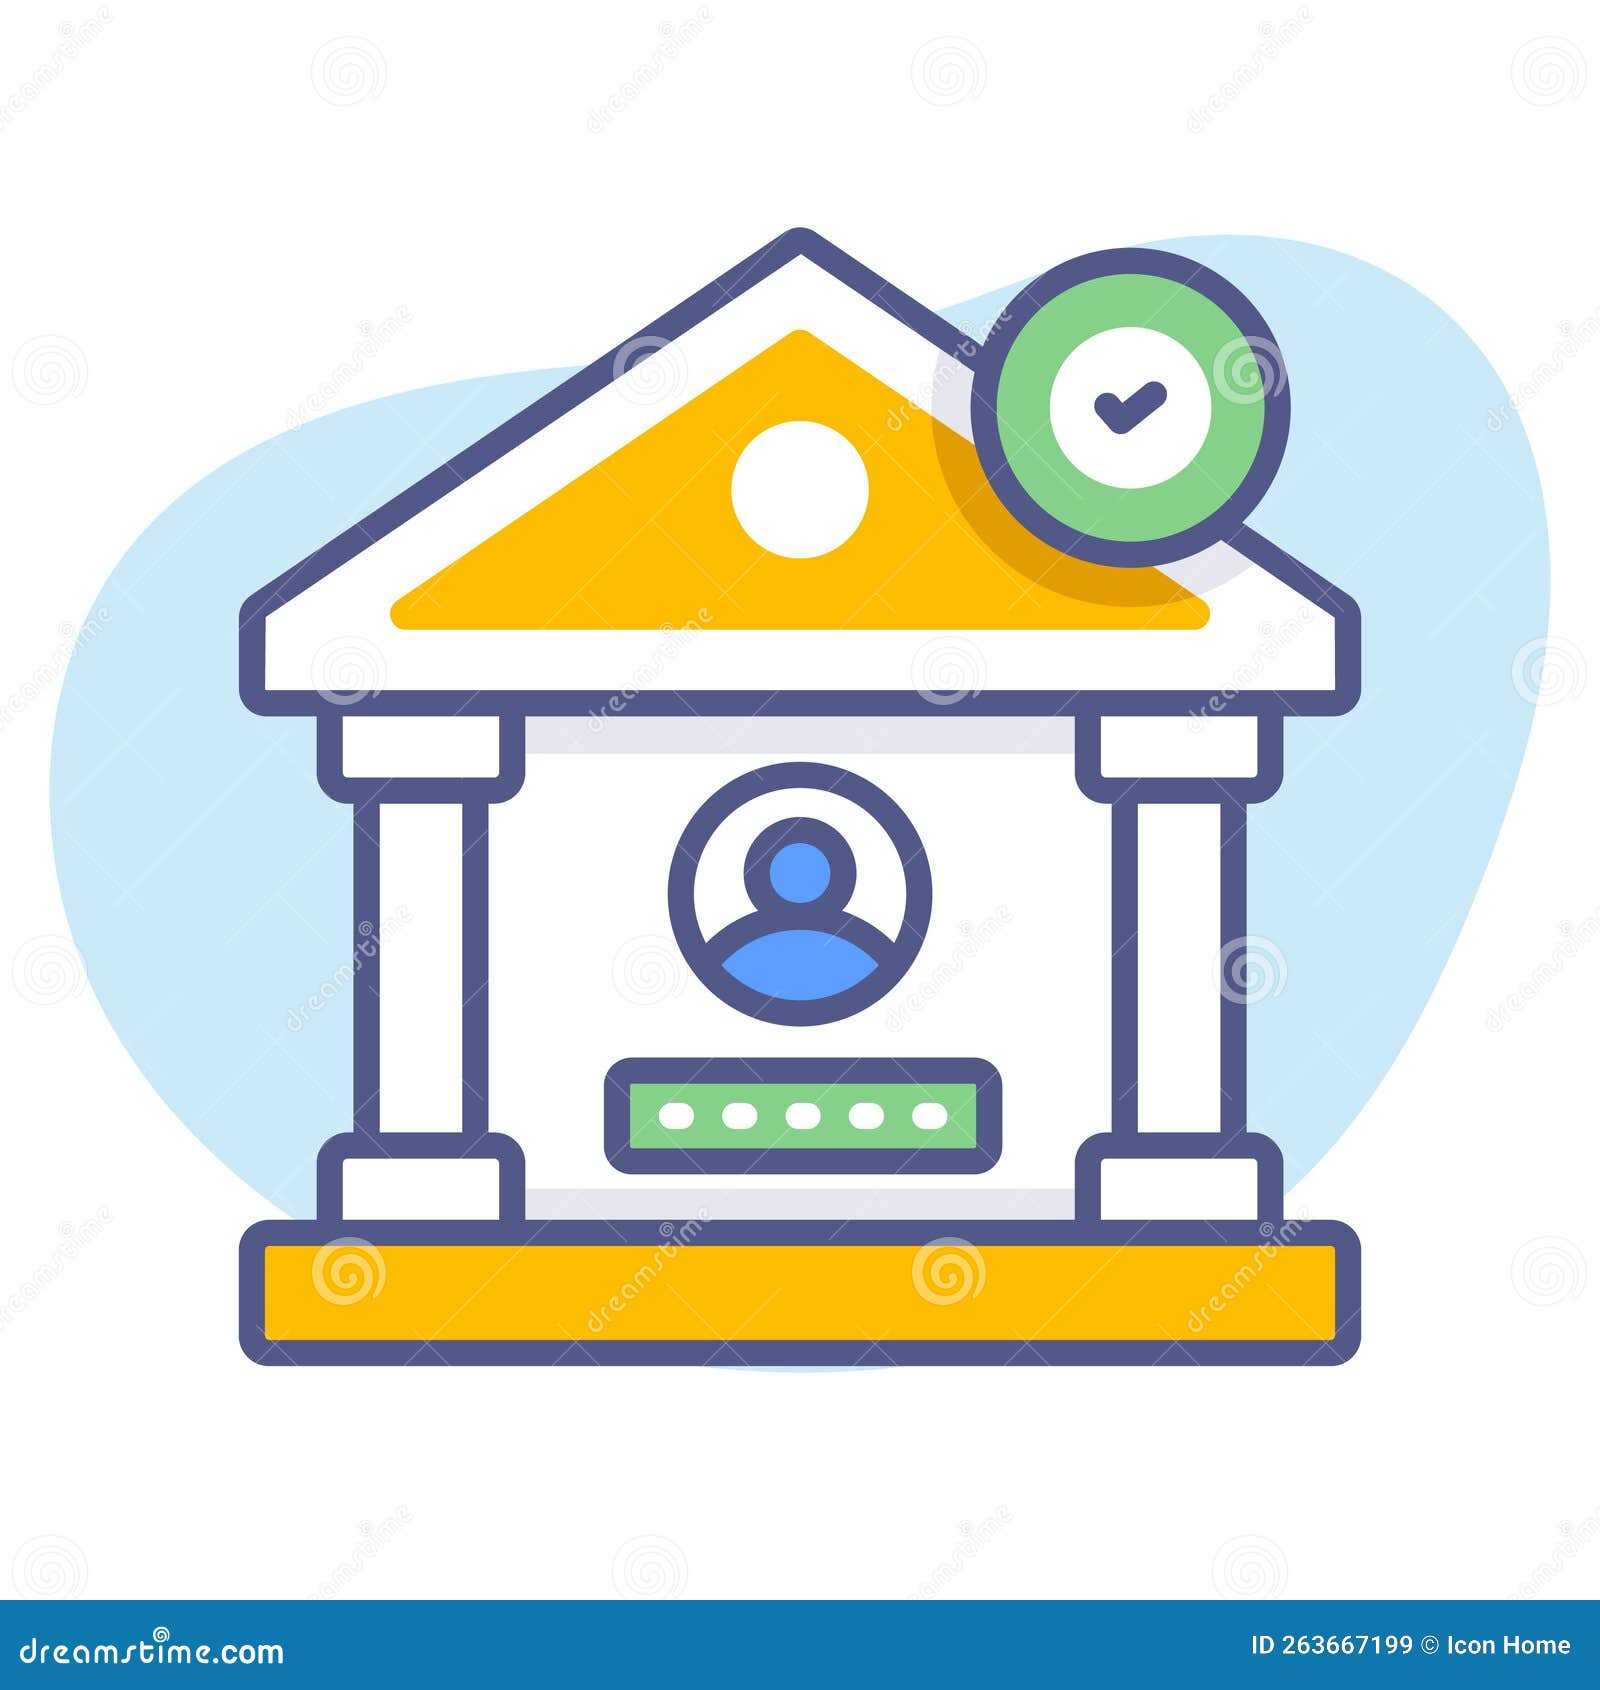 Bank Account, Banking, Premium Quality Vector Illustration Concept. Flat  Line Icon Stock Vector - Illustration of government, federal: 263667199